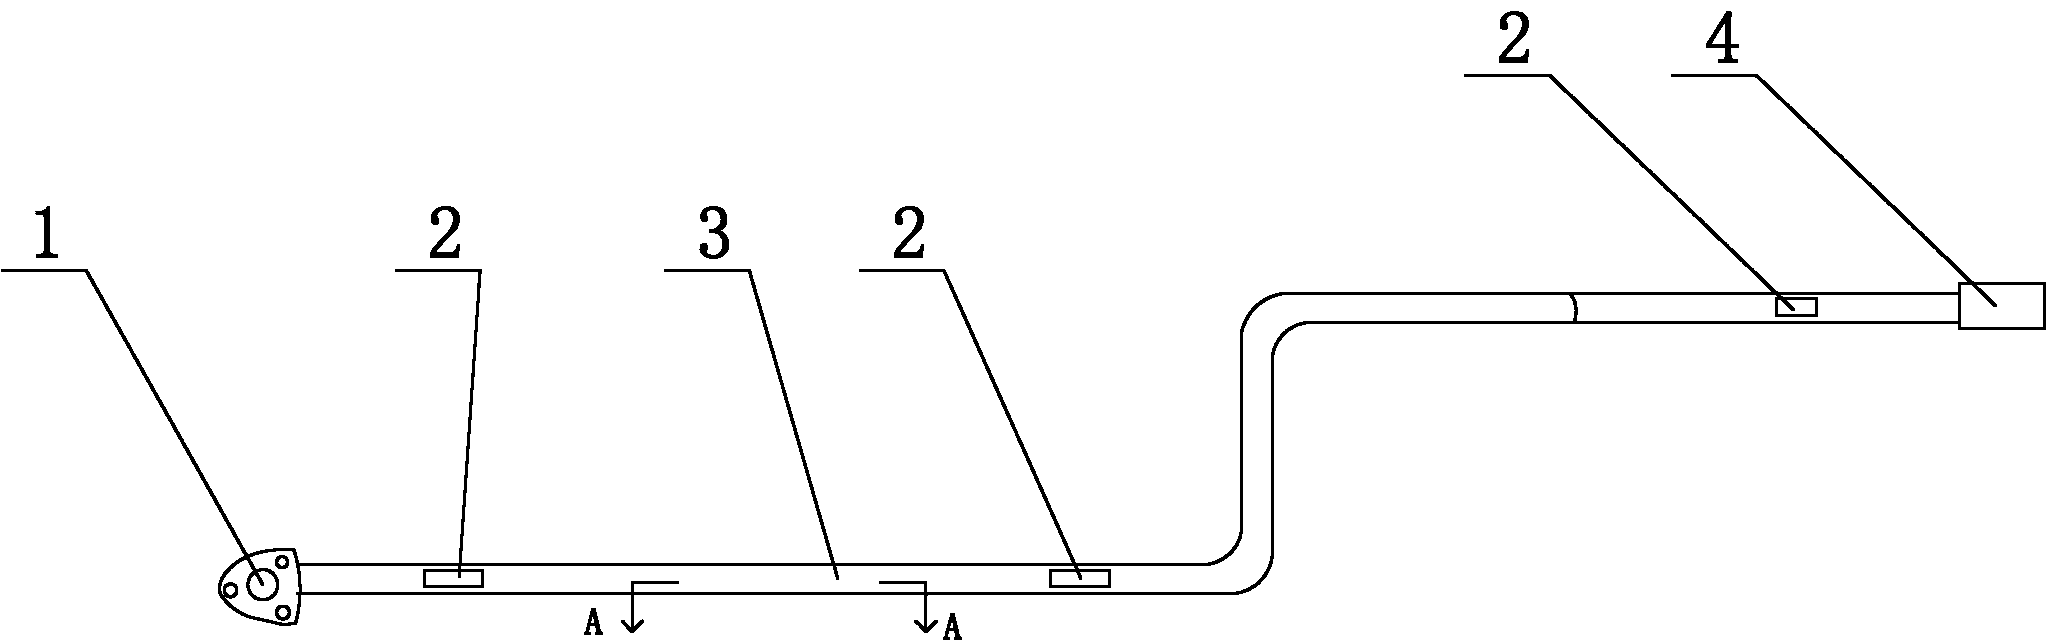 Integrated exhaust device applied to agricultural vehicles